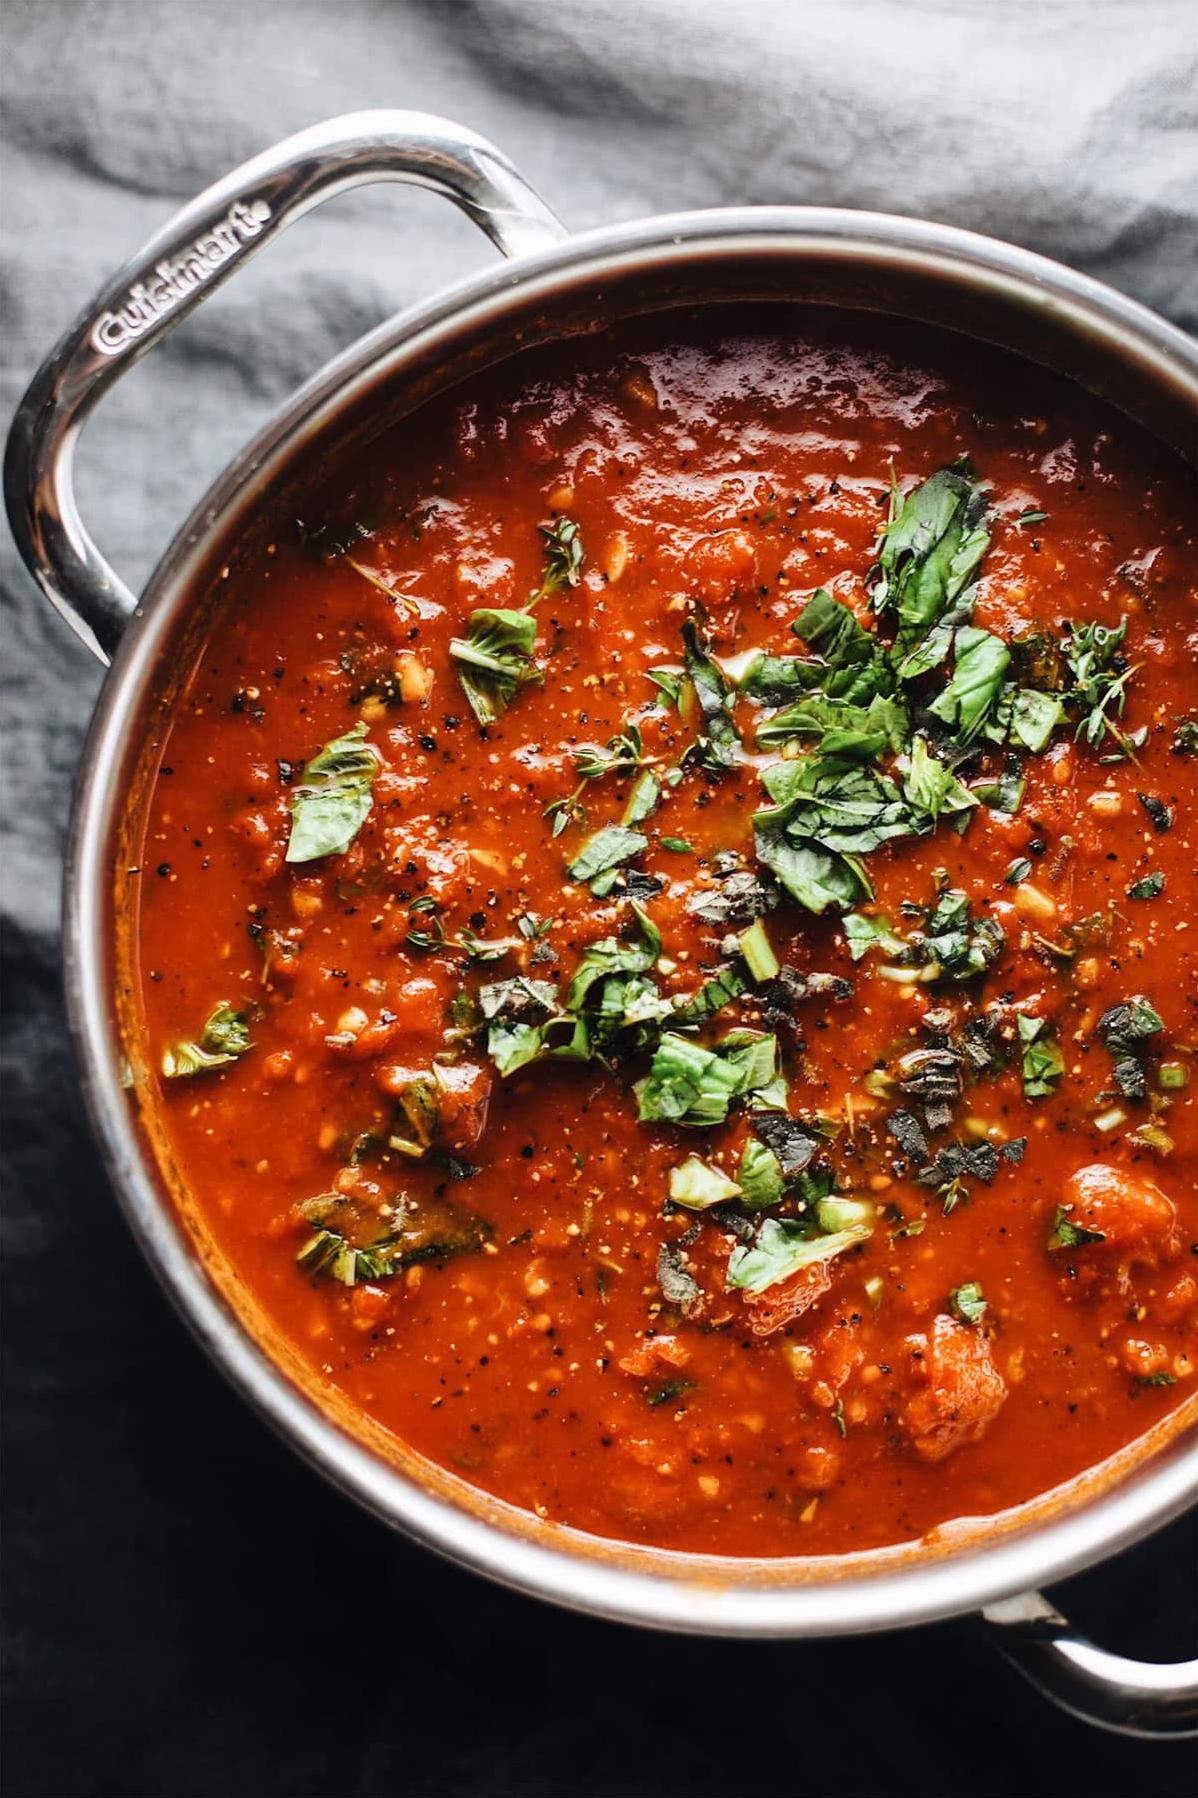  Whip up a batch of this delicious tomato sauce and enjoy the taste of Italy at home